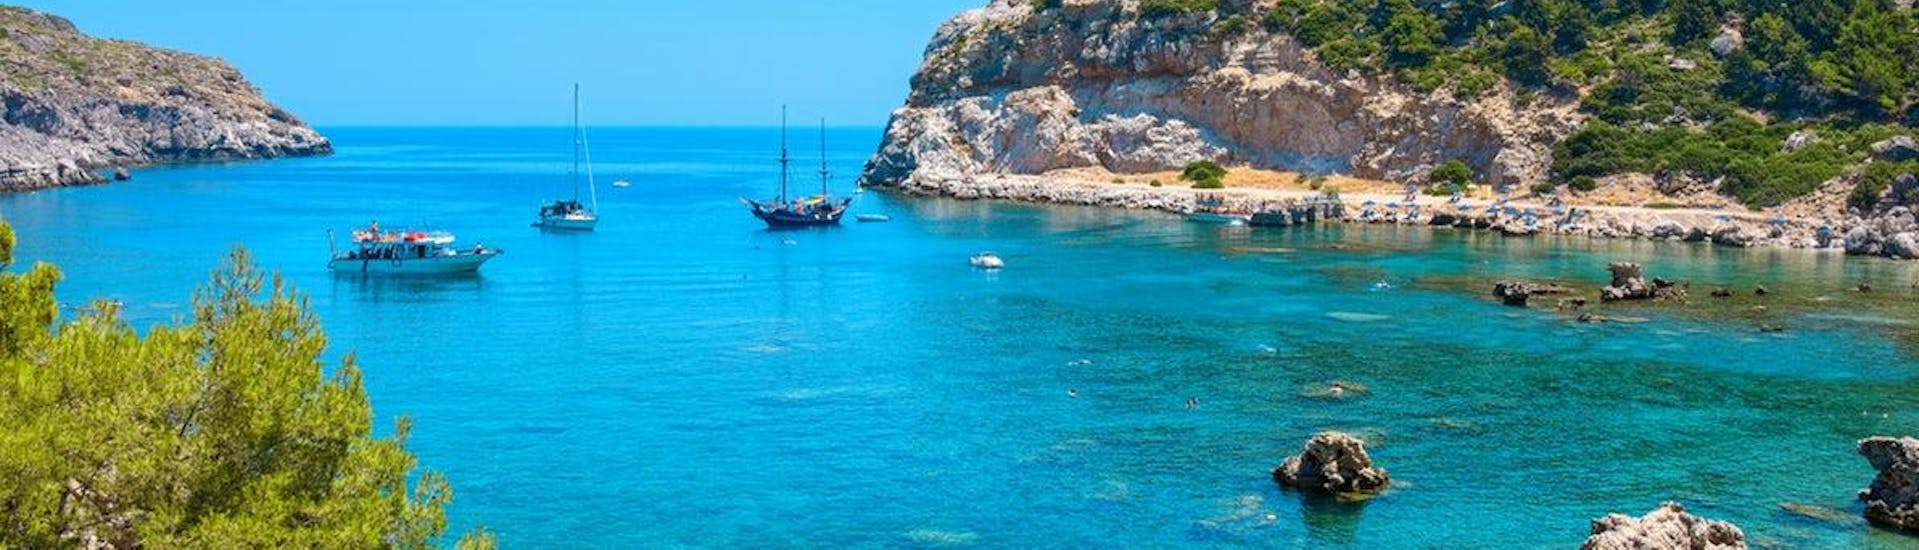 The bay you will visit with our Private Boat Trip to Kallithea Springs from Rhodes with BOSS Cruises.